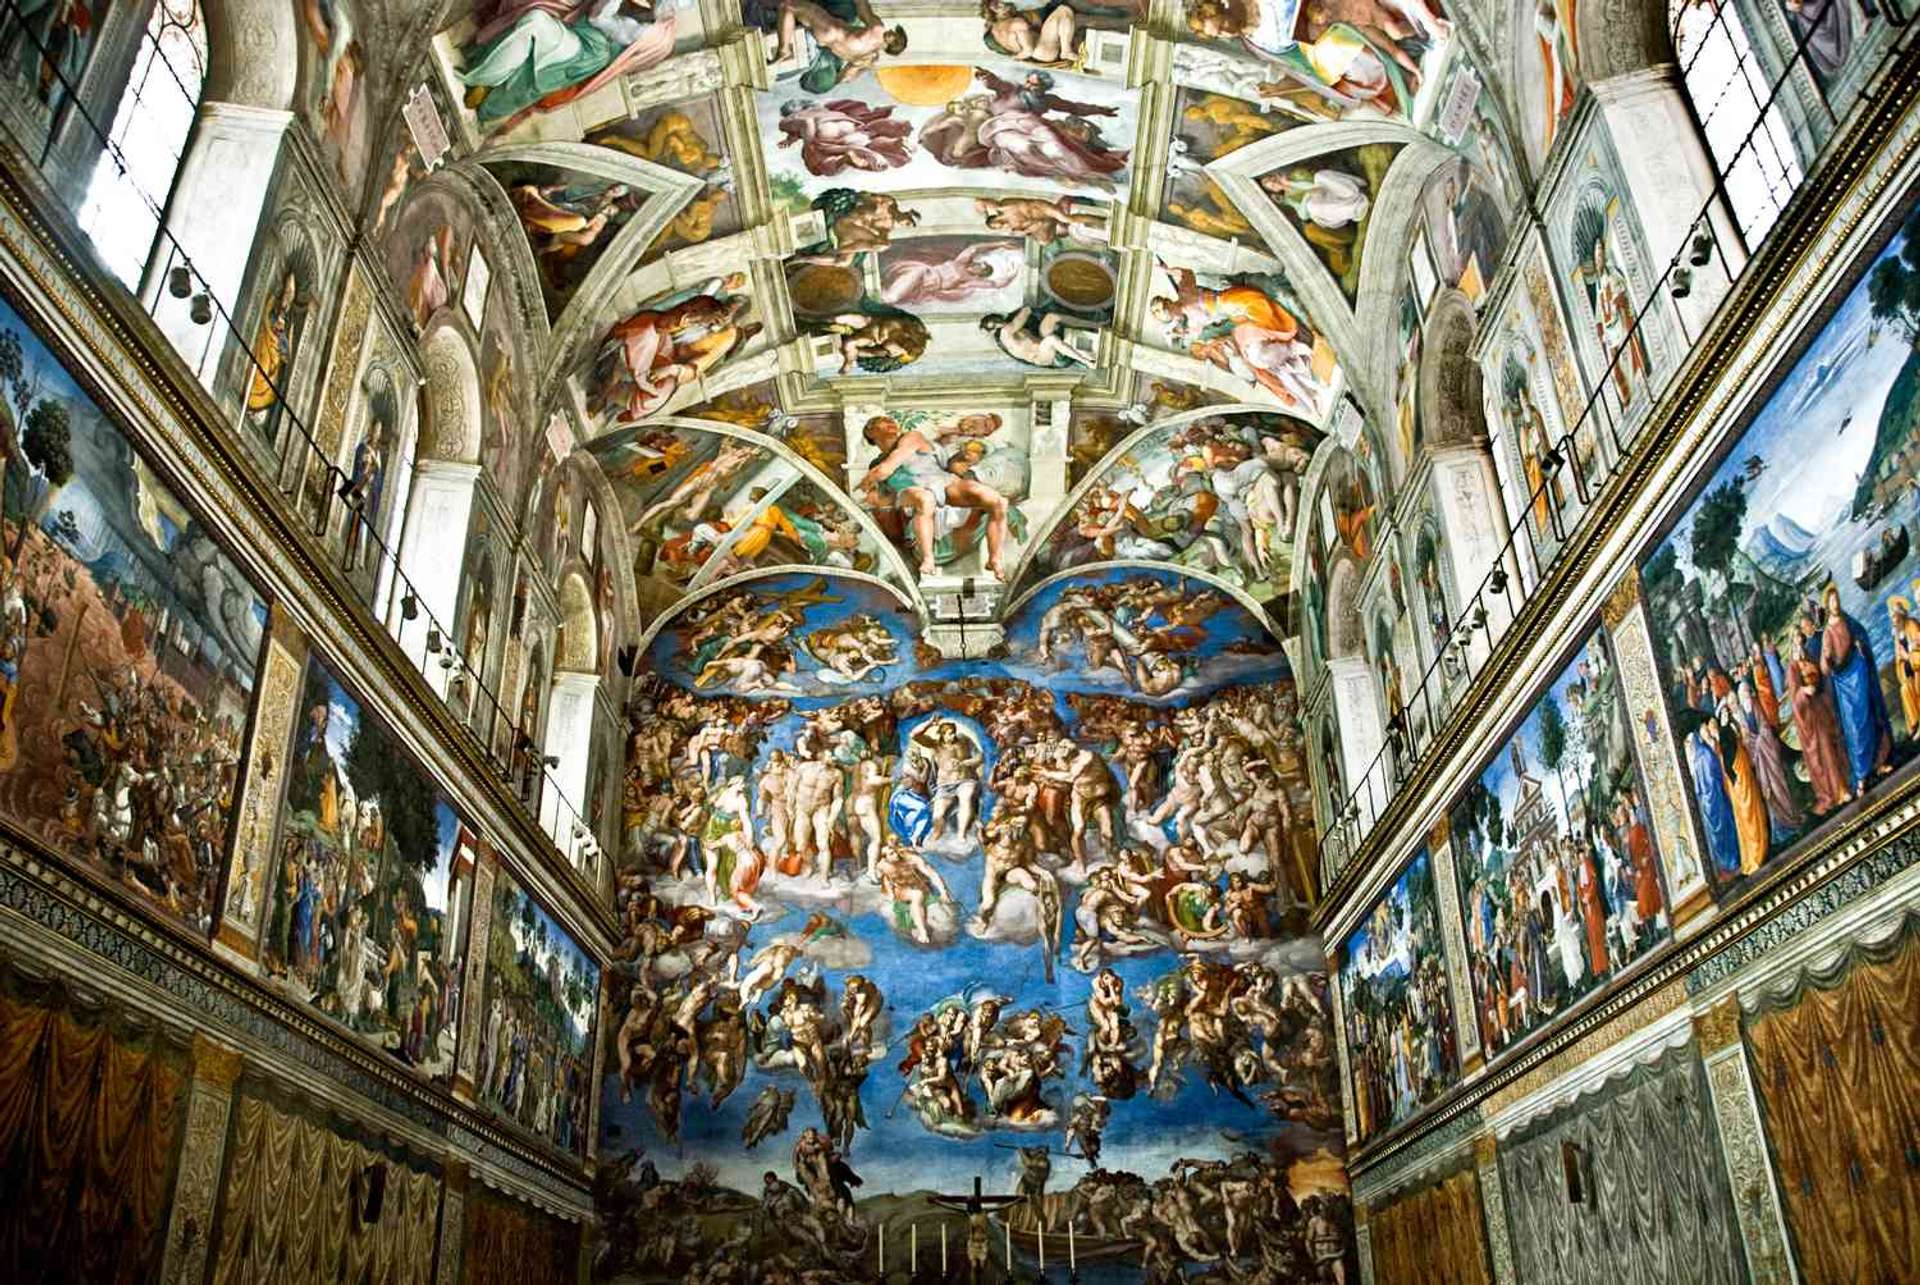 An image of the Sistine Chapel, painted by Michelangelo. It is a detailed depiction of several biblical scenes, including the final judgement in the main wall shown here.